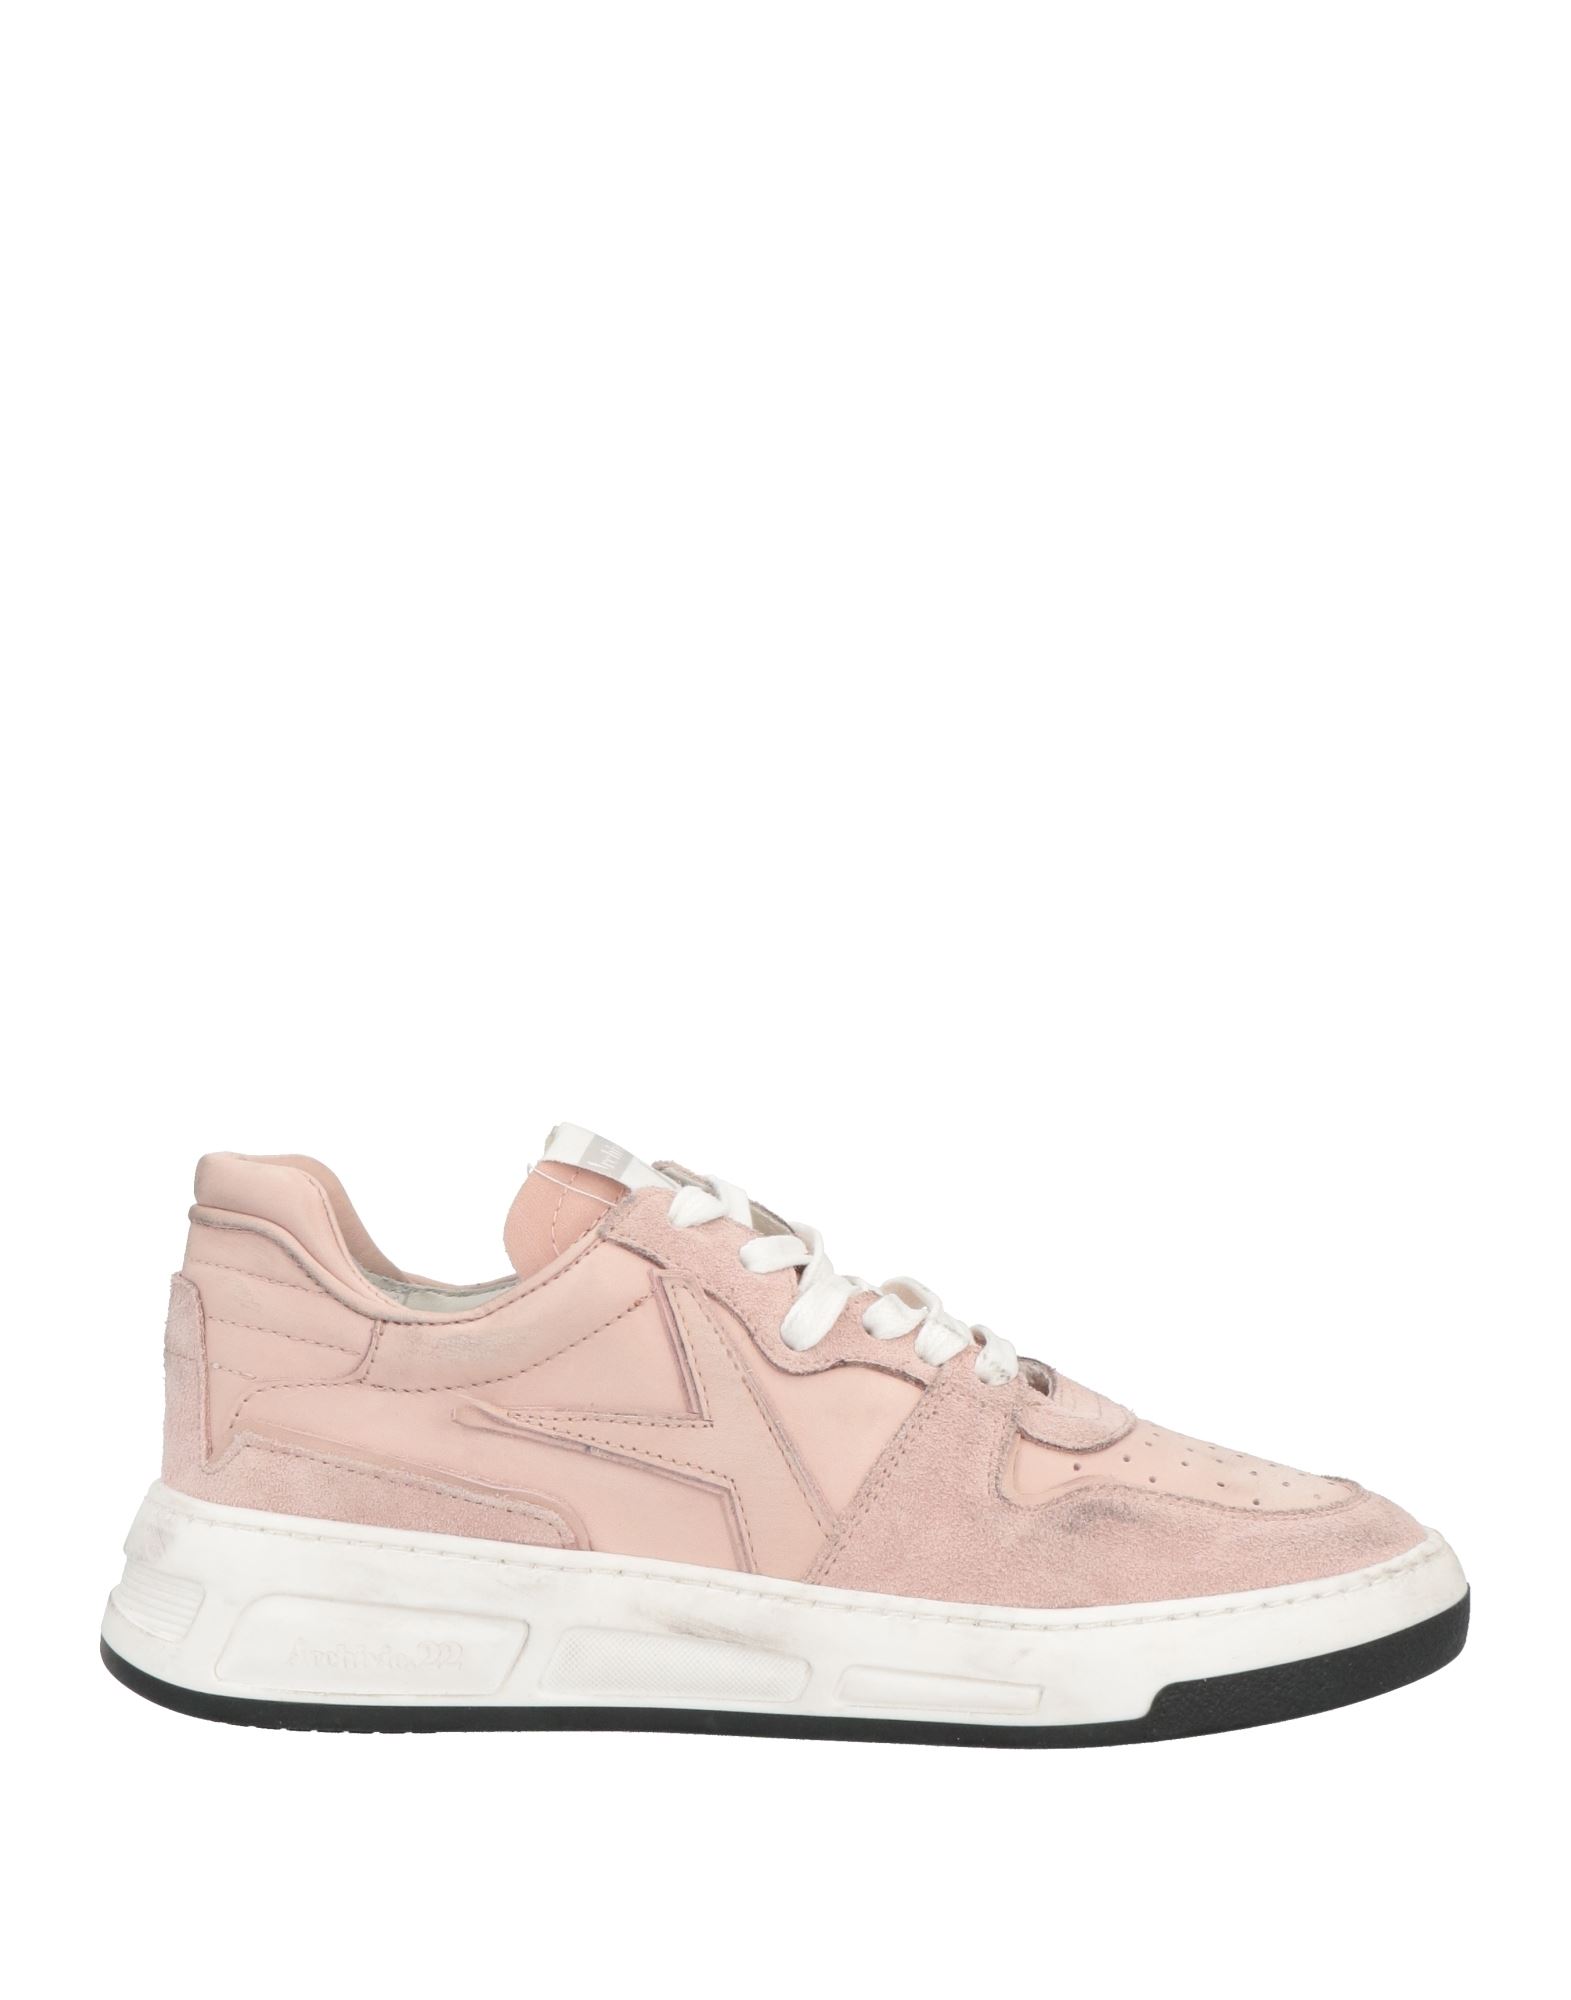 Archivio,22 Sneakers In Pink